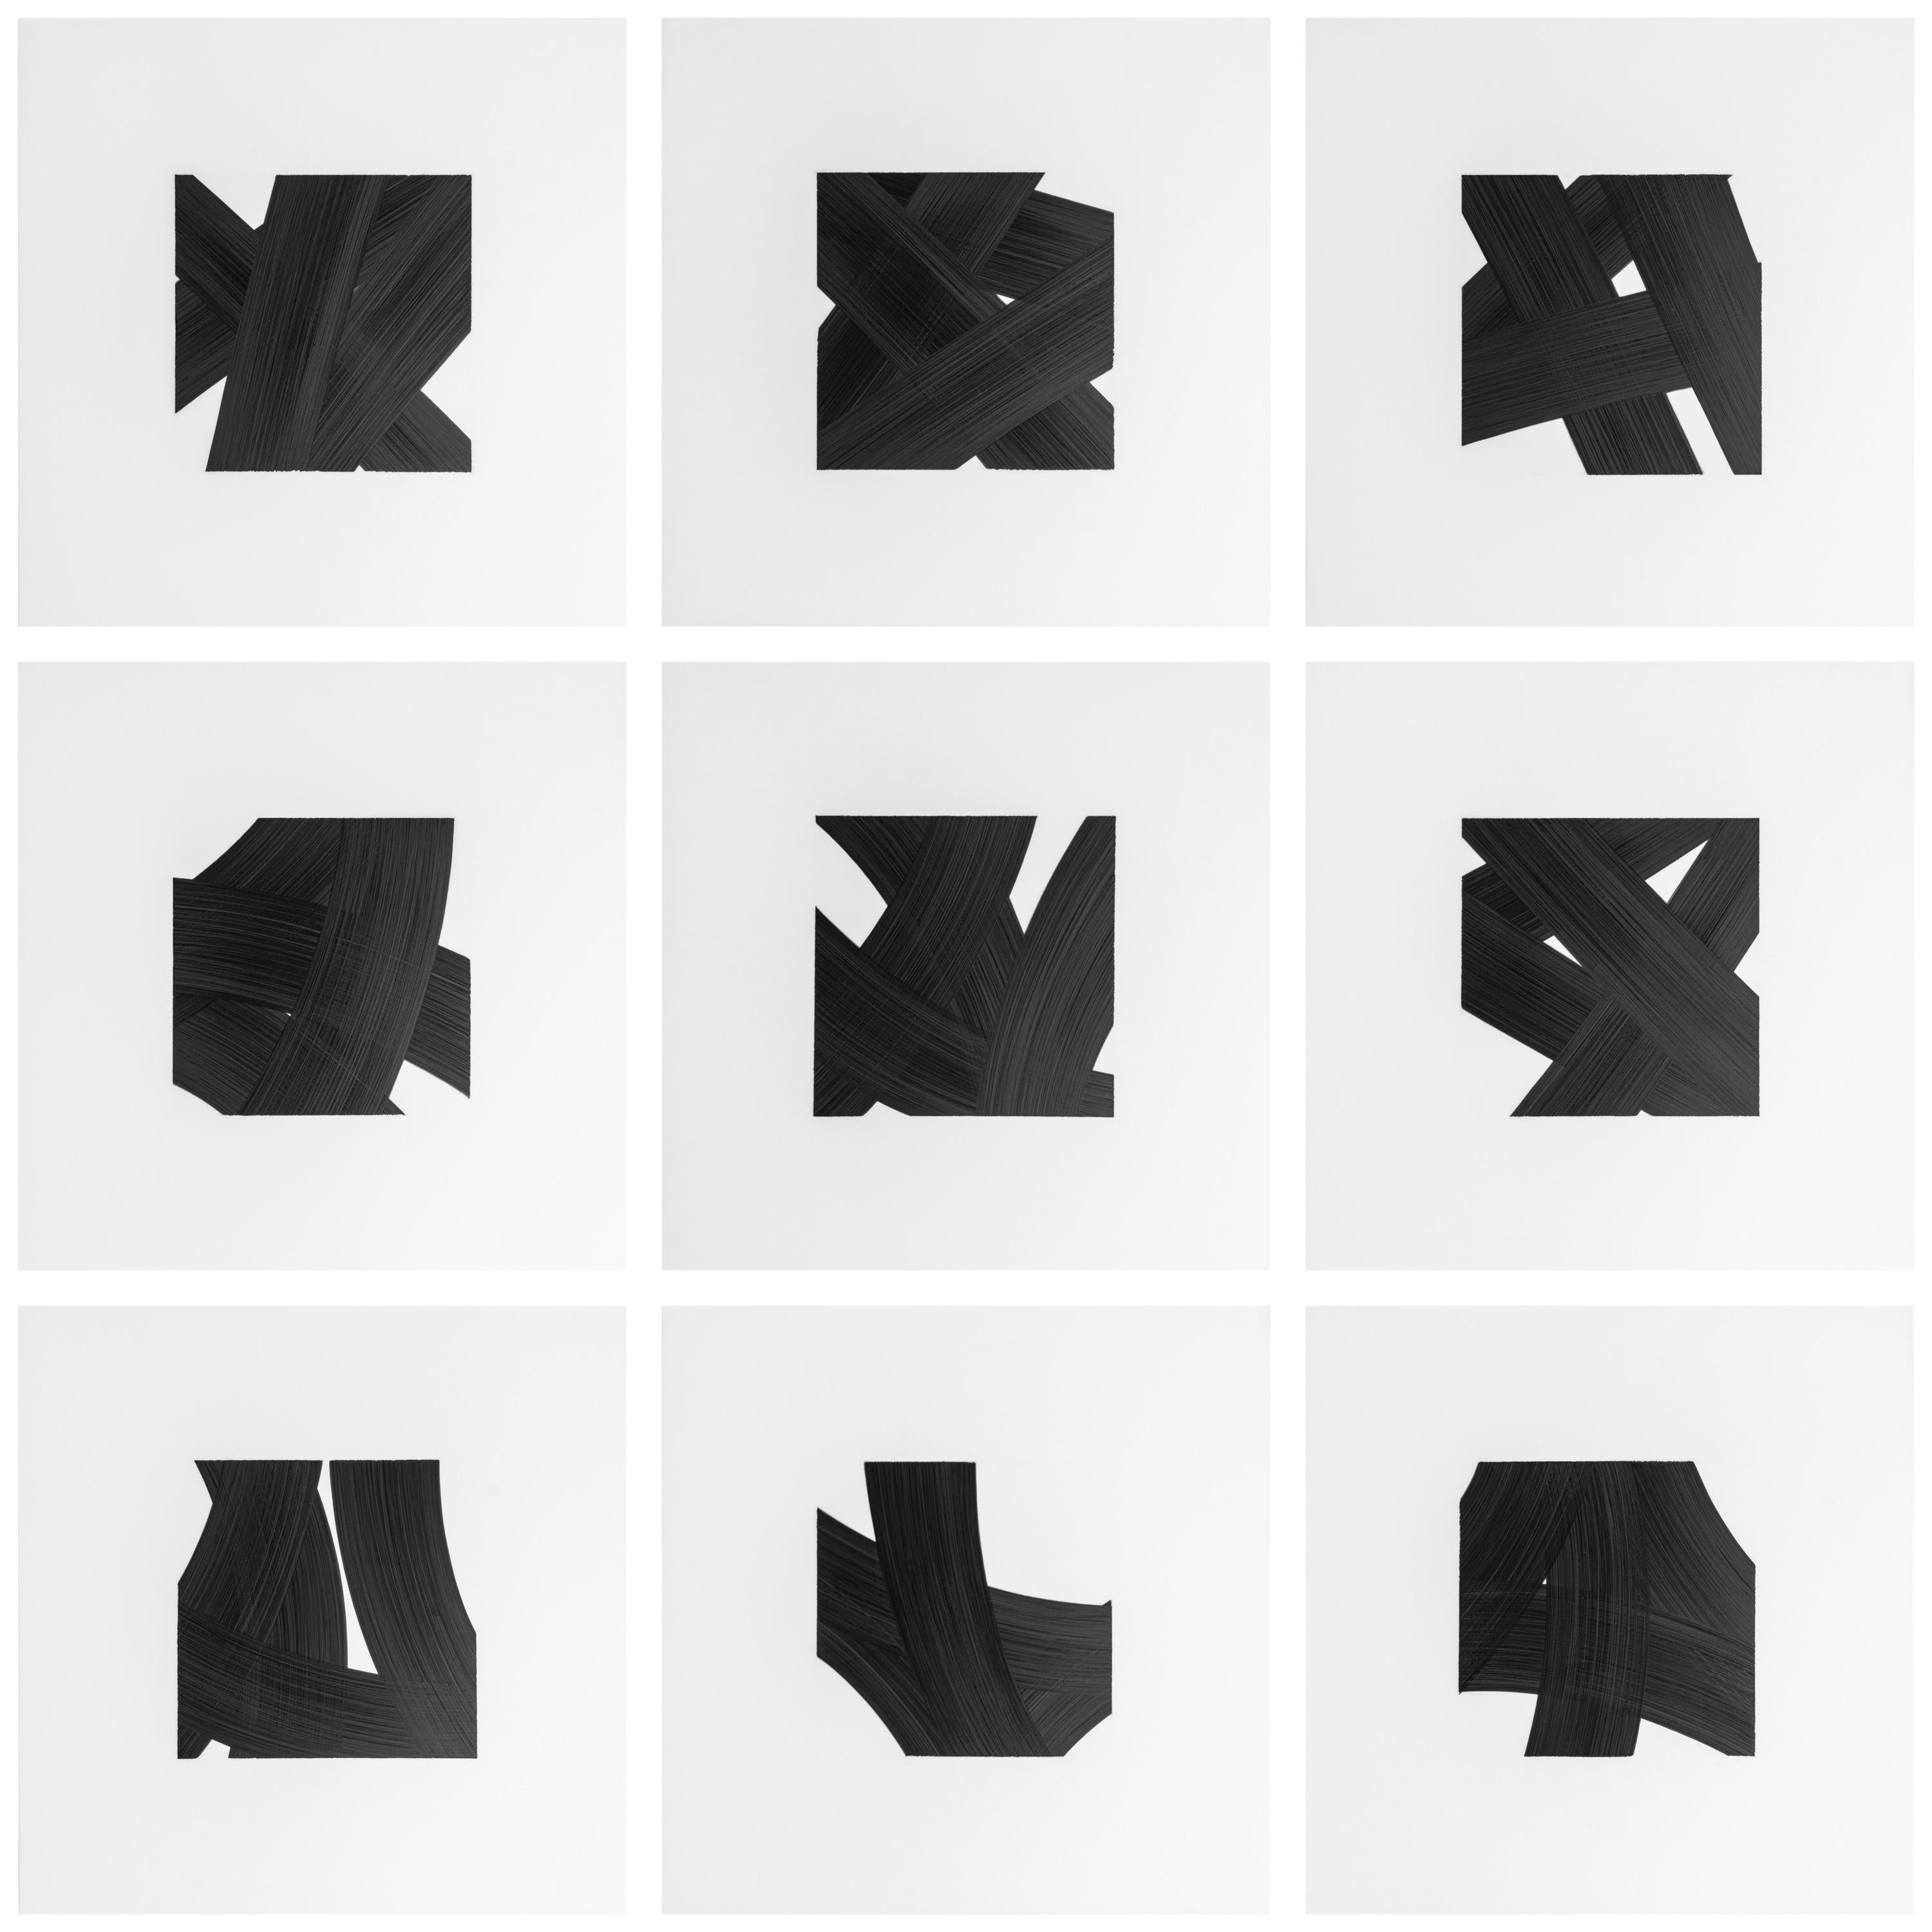 Patrick Carrara Black Ink on Mylar Drawings, Appearance Series, 2016 - 2017 For Sale